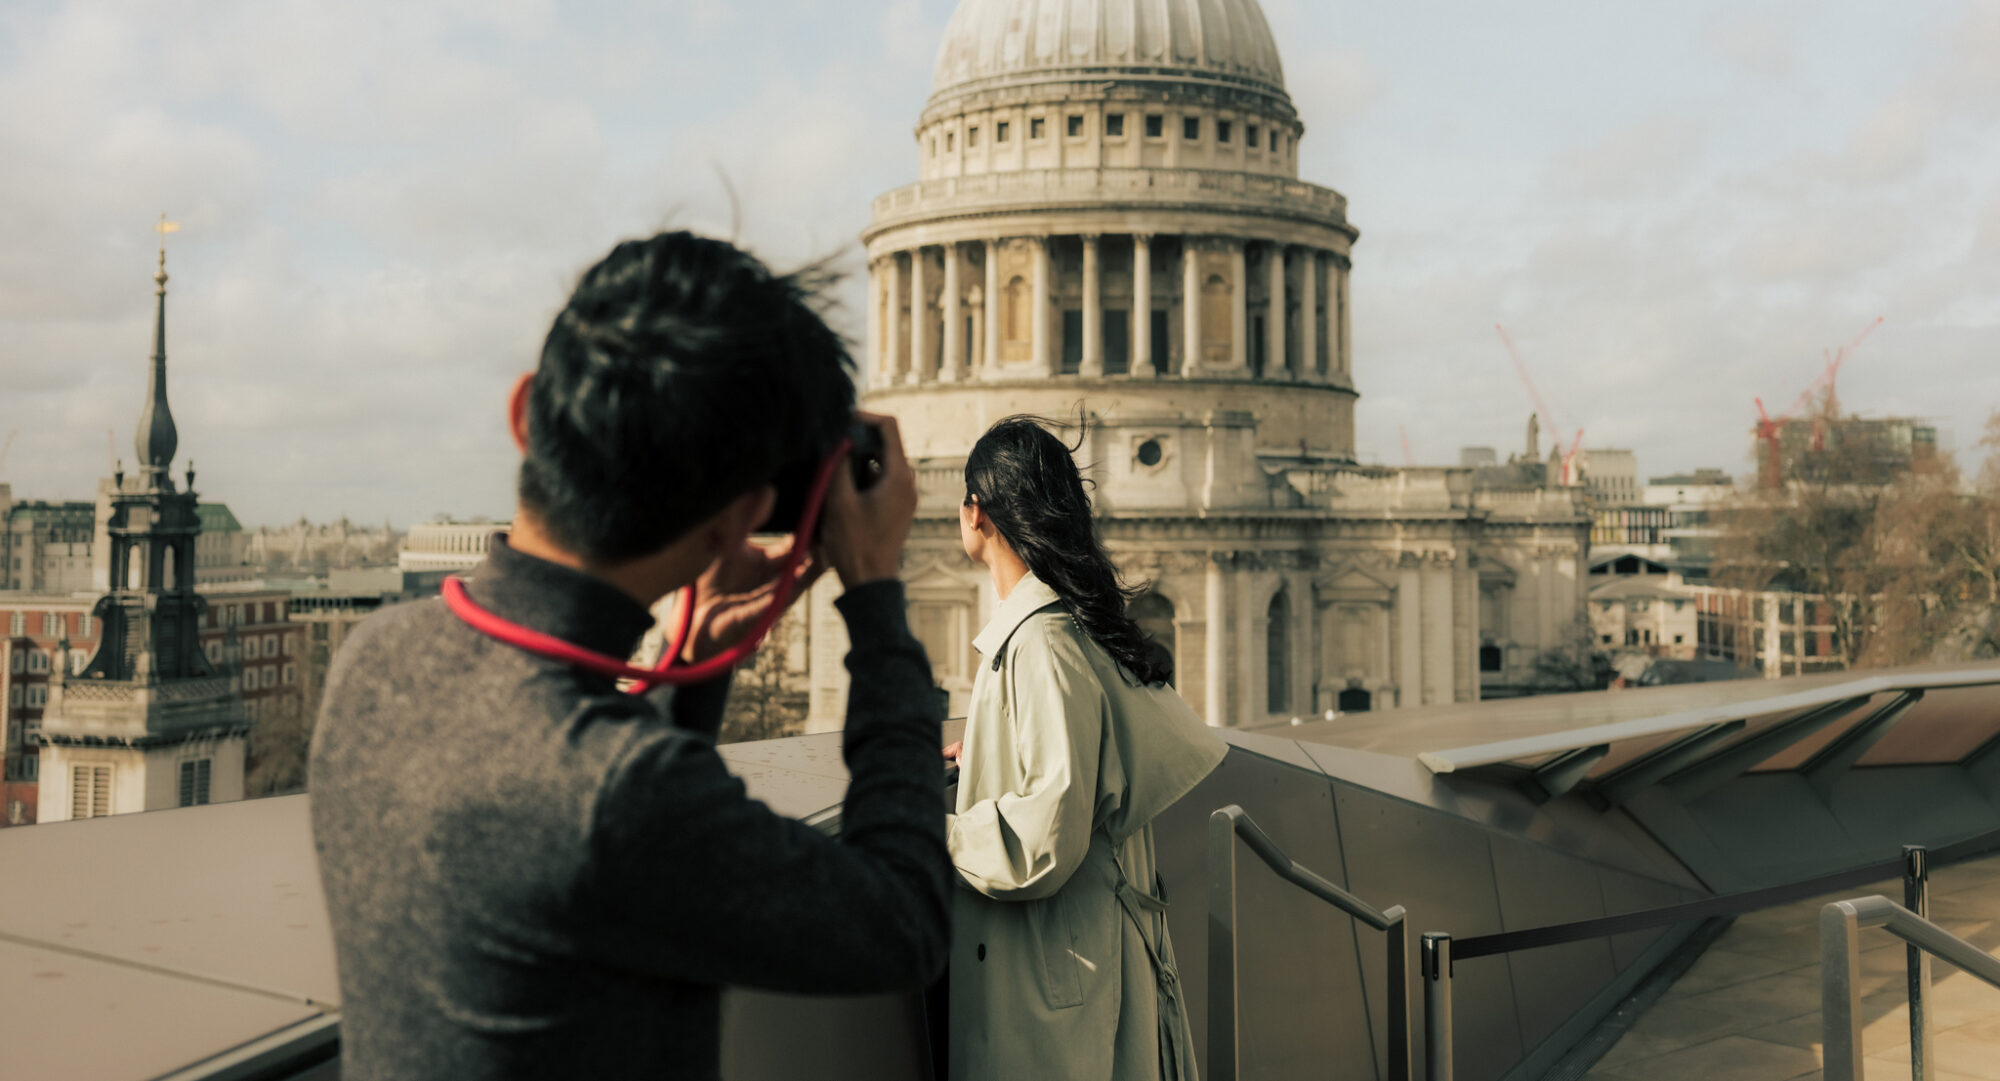 Attractions in the City of London - photoshoot in front of St Paul's - man taking picture of woman with DSLR camera